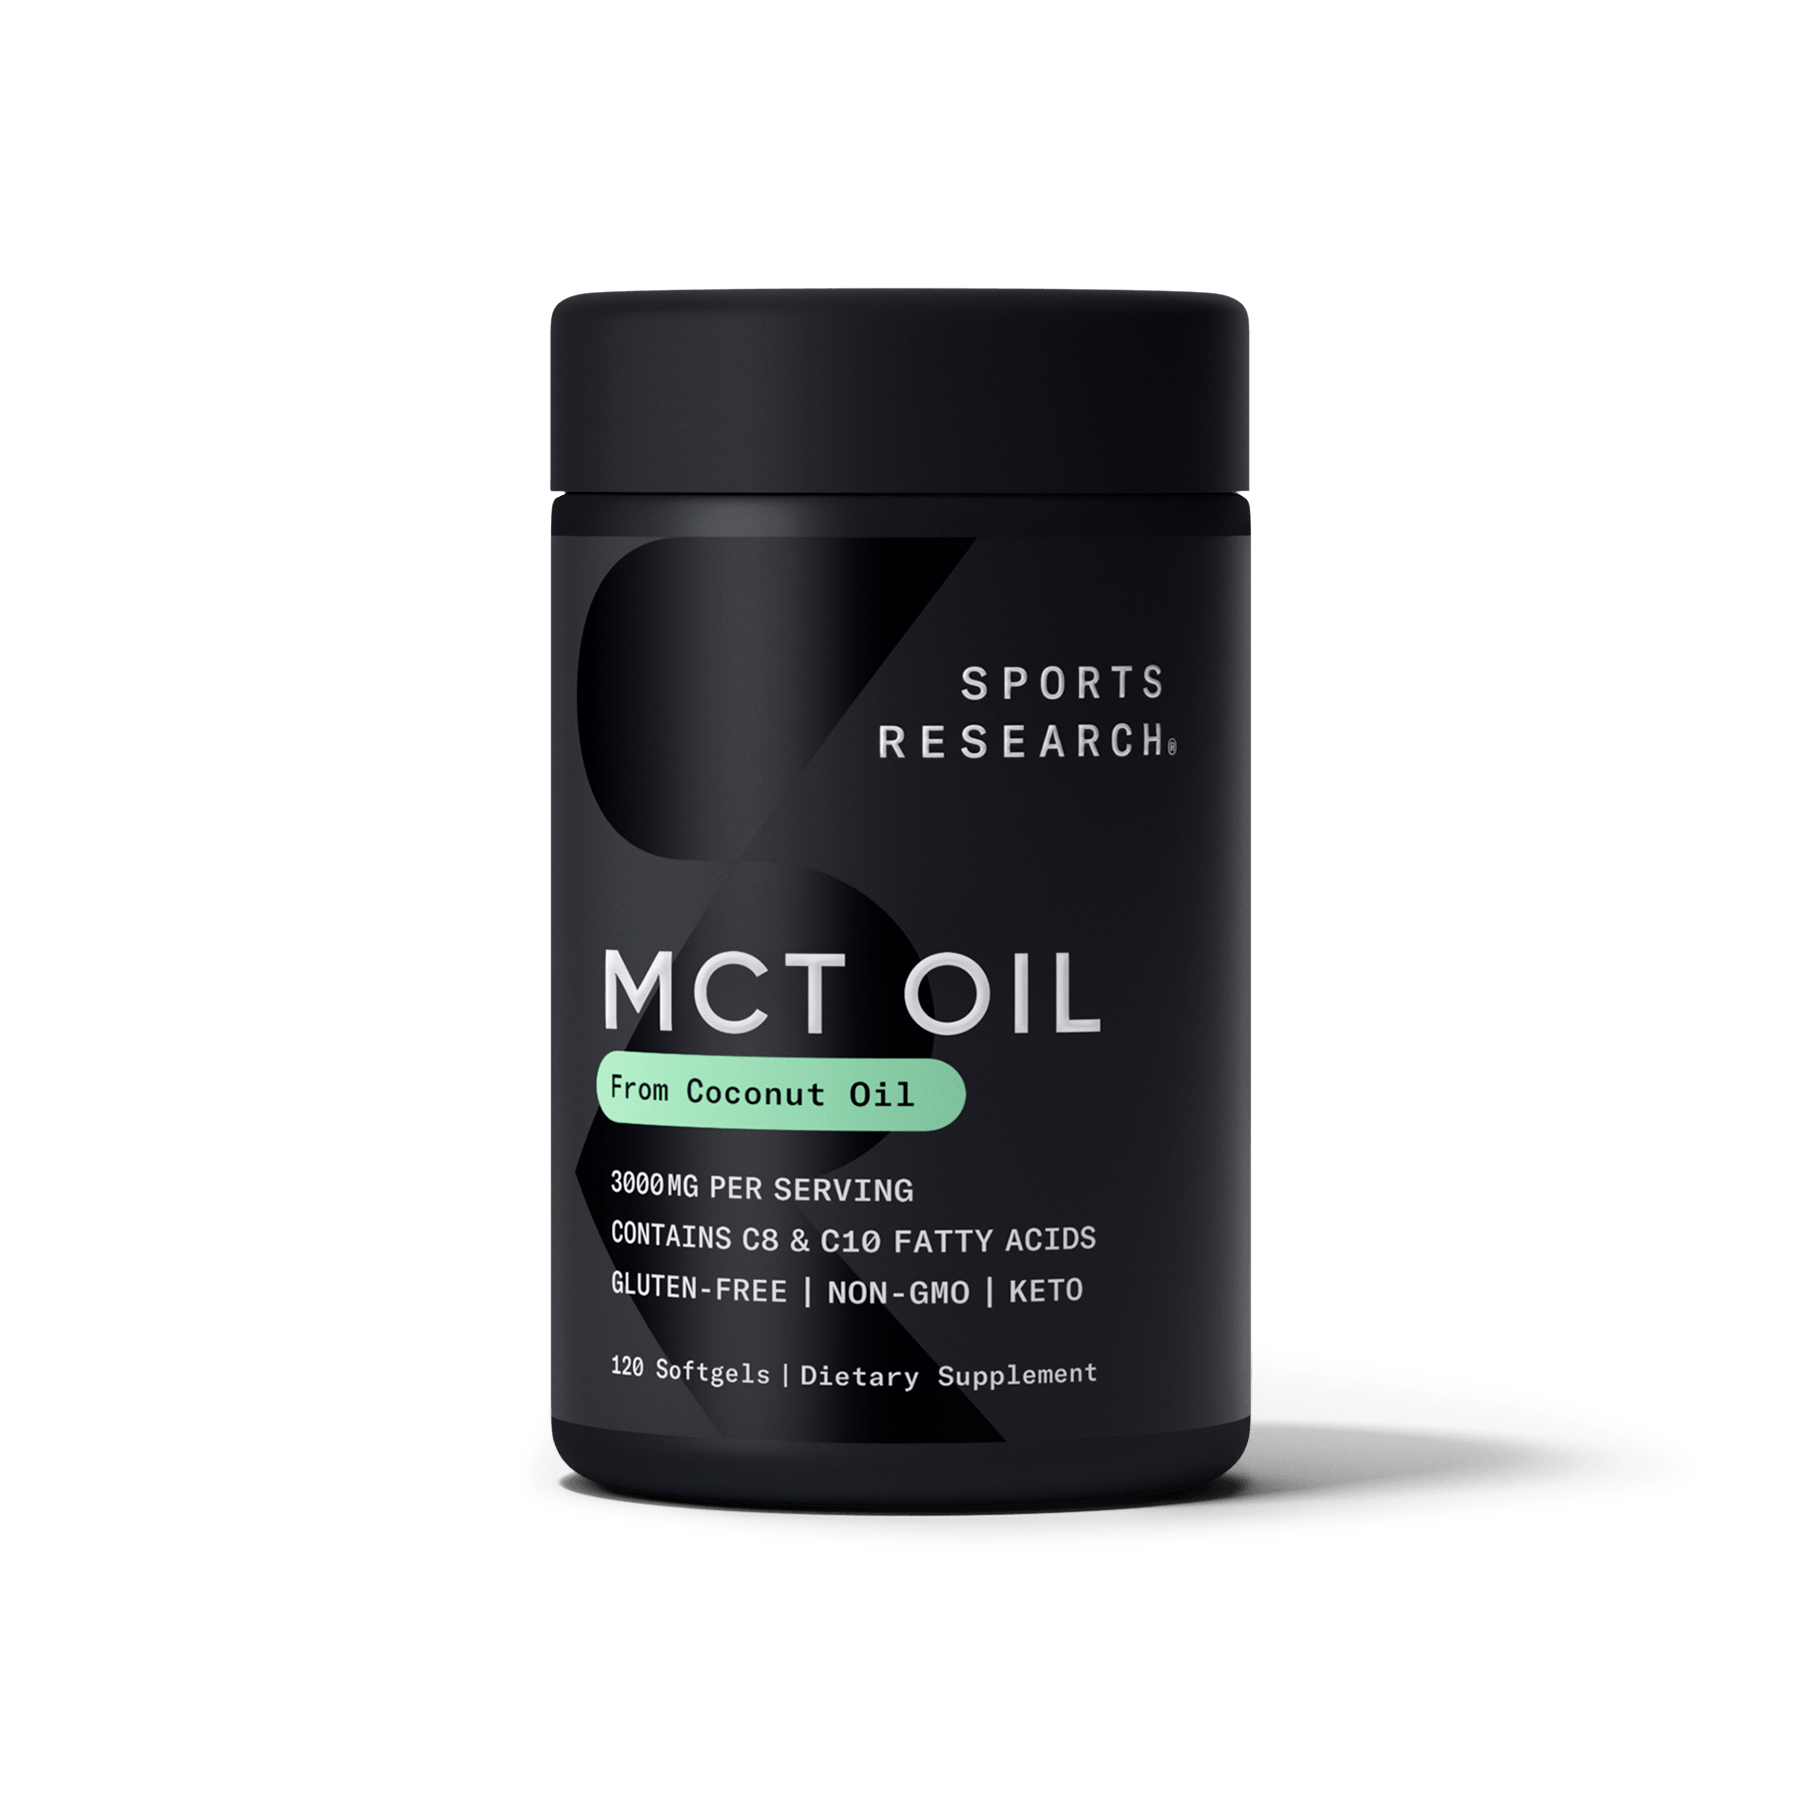 Sports Research MCT Oil from Coconut.